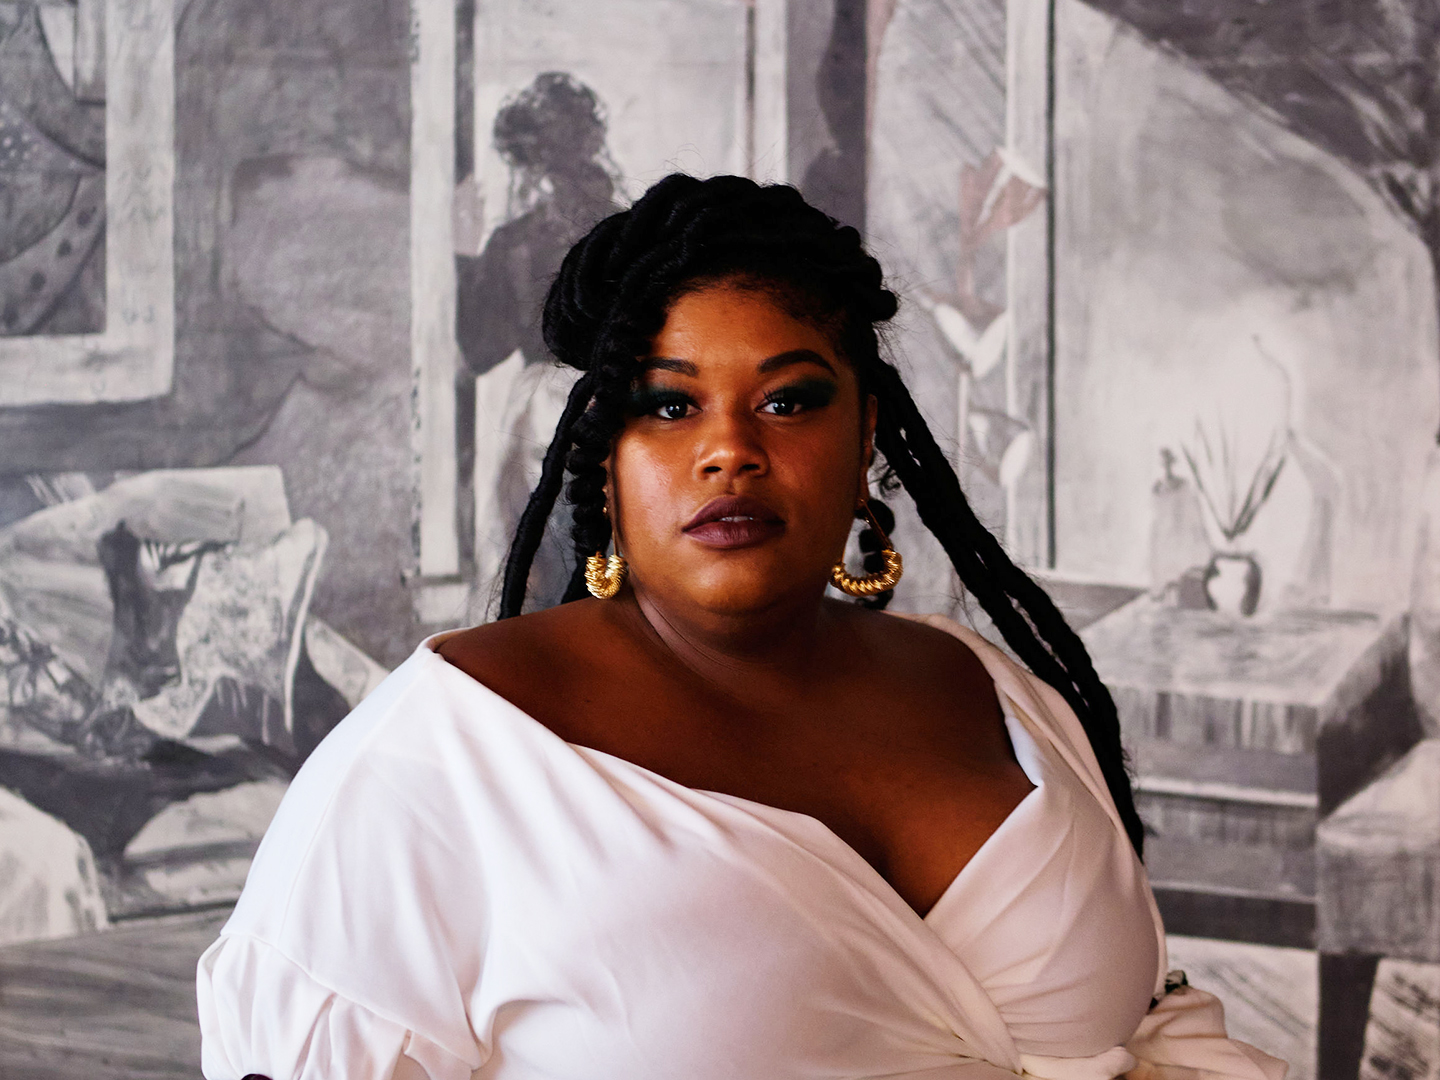 Photo of Glyneisah Johnson wearing a white blouse and gold hoop earrings standing in front of one of her paintings.